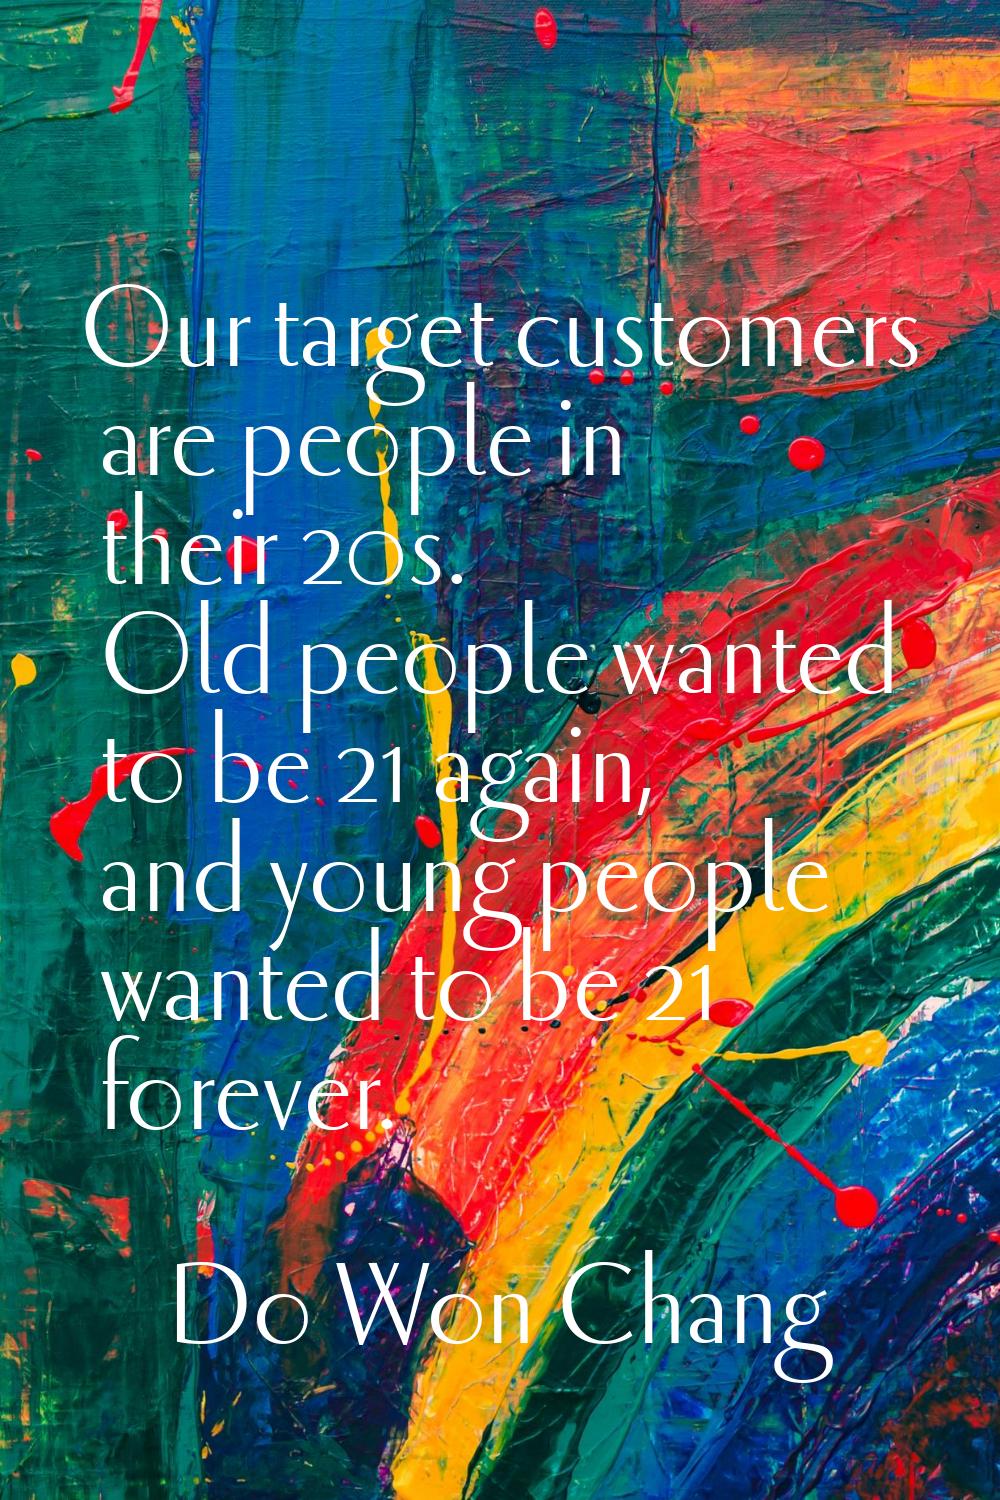 Our target customers are people in their 20s. Old people wanted to be 21 again, and young people wa